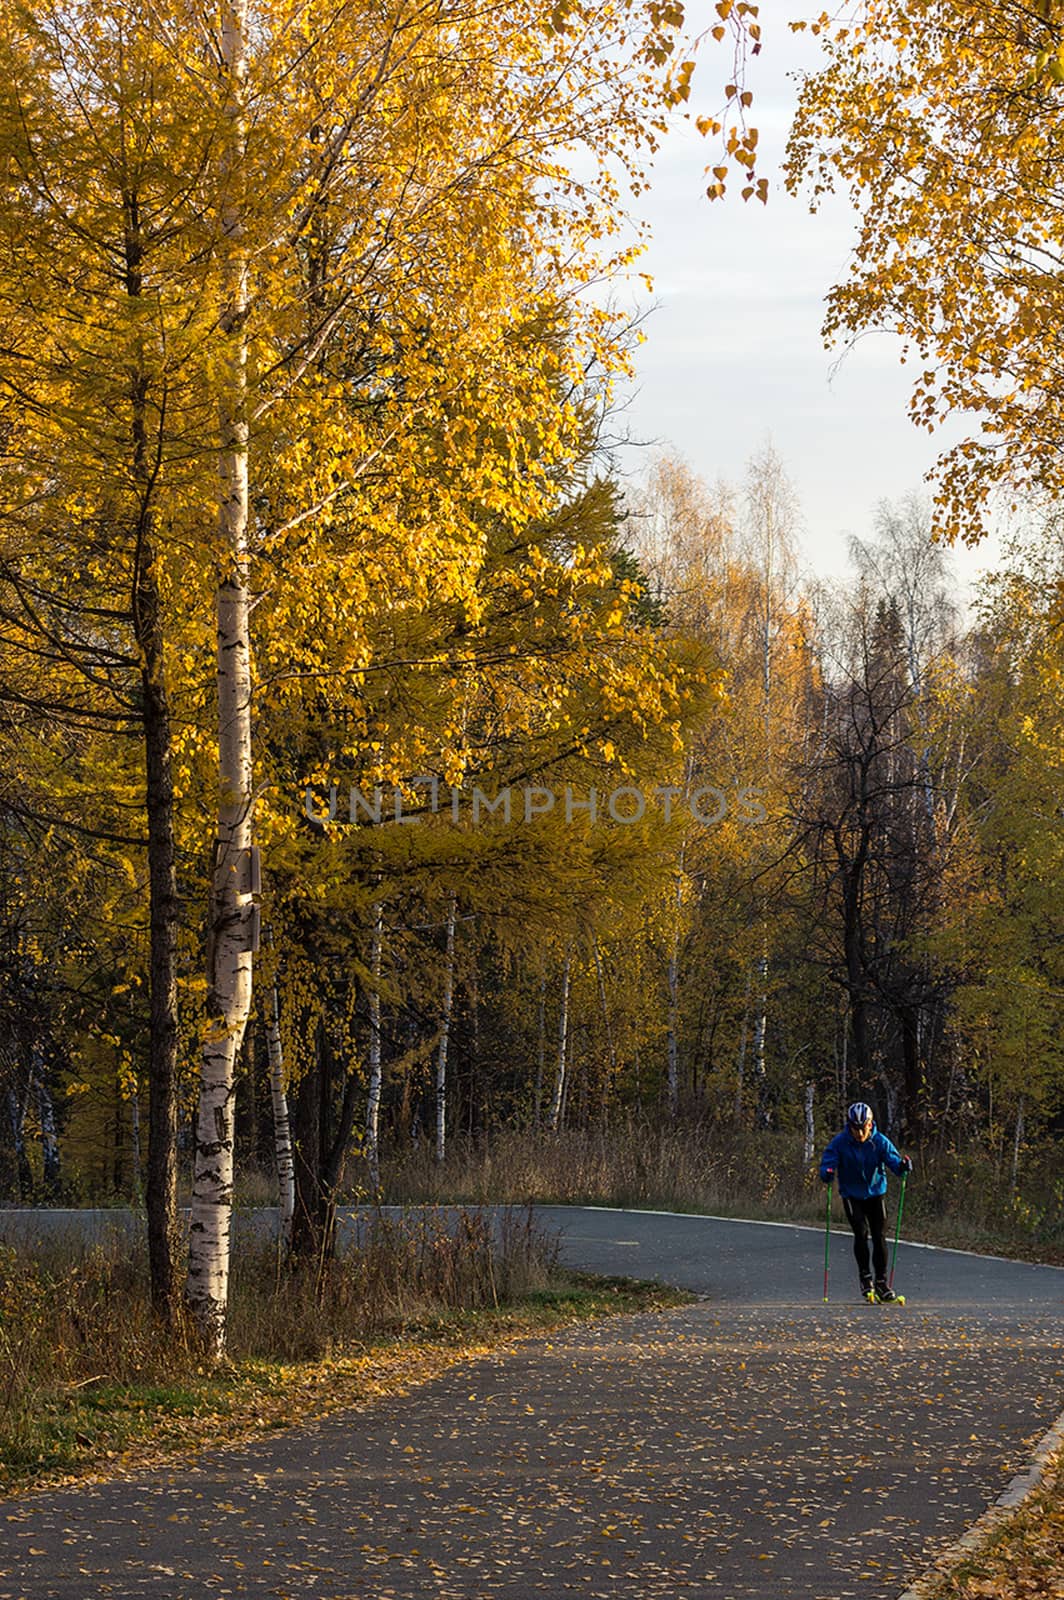 yellow birch leaves in park. Asphalt pavement in the park and birch trees. by DePo